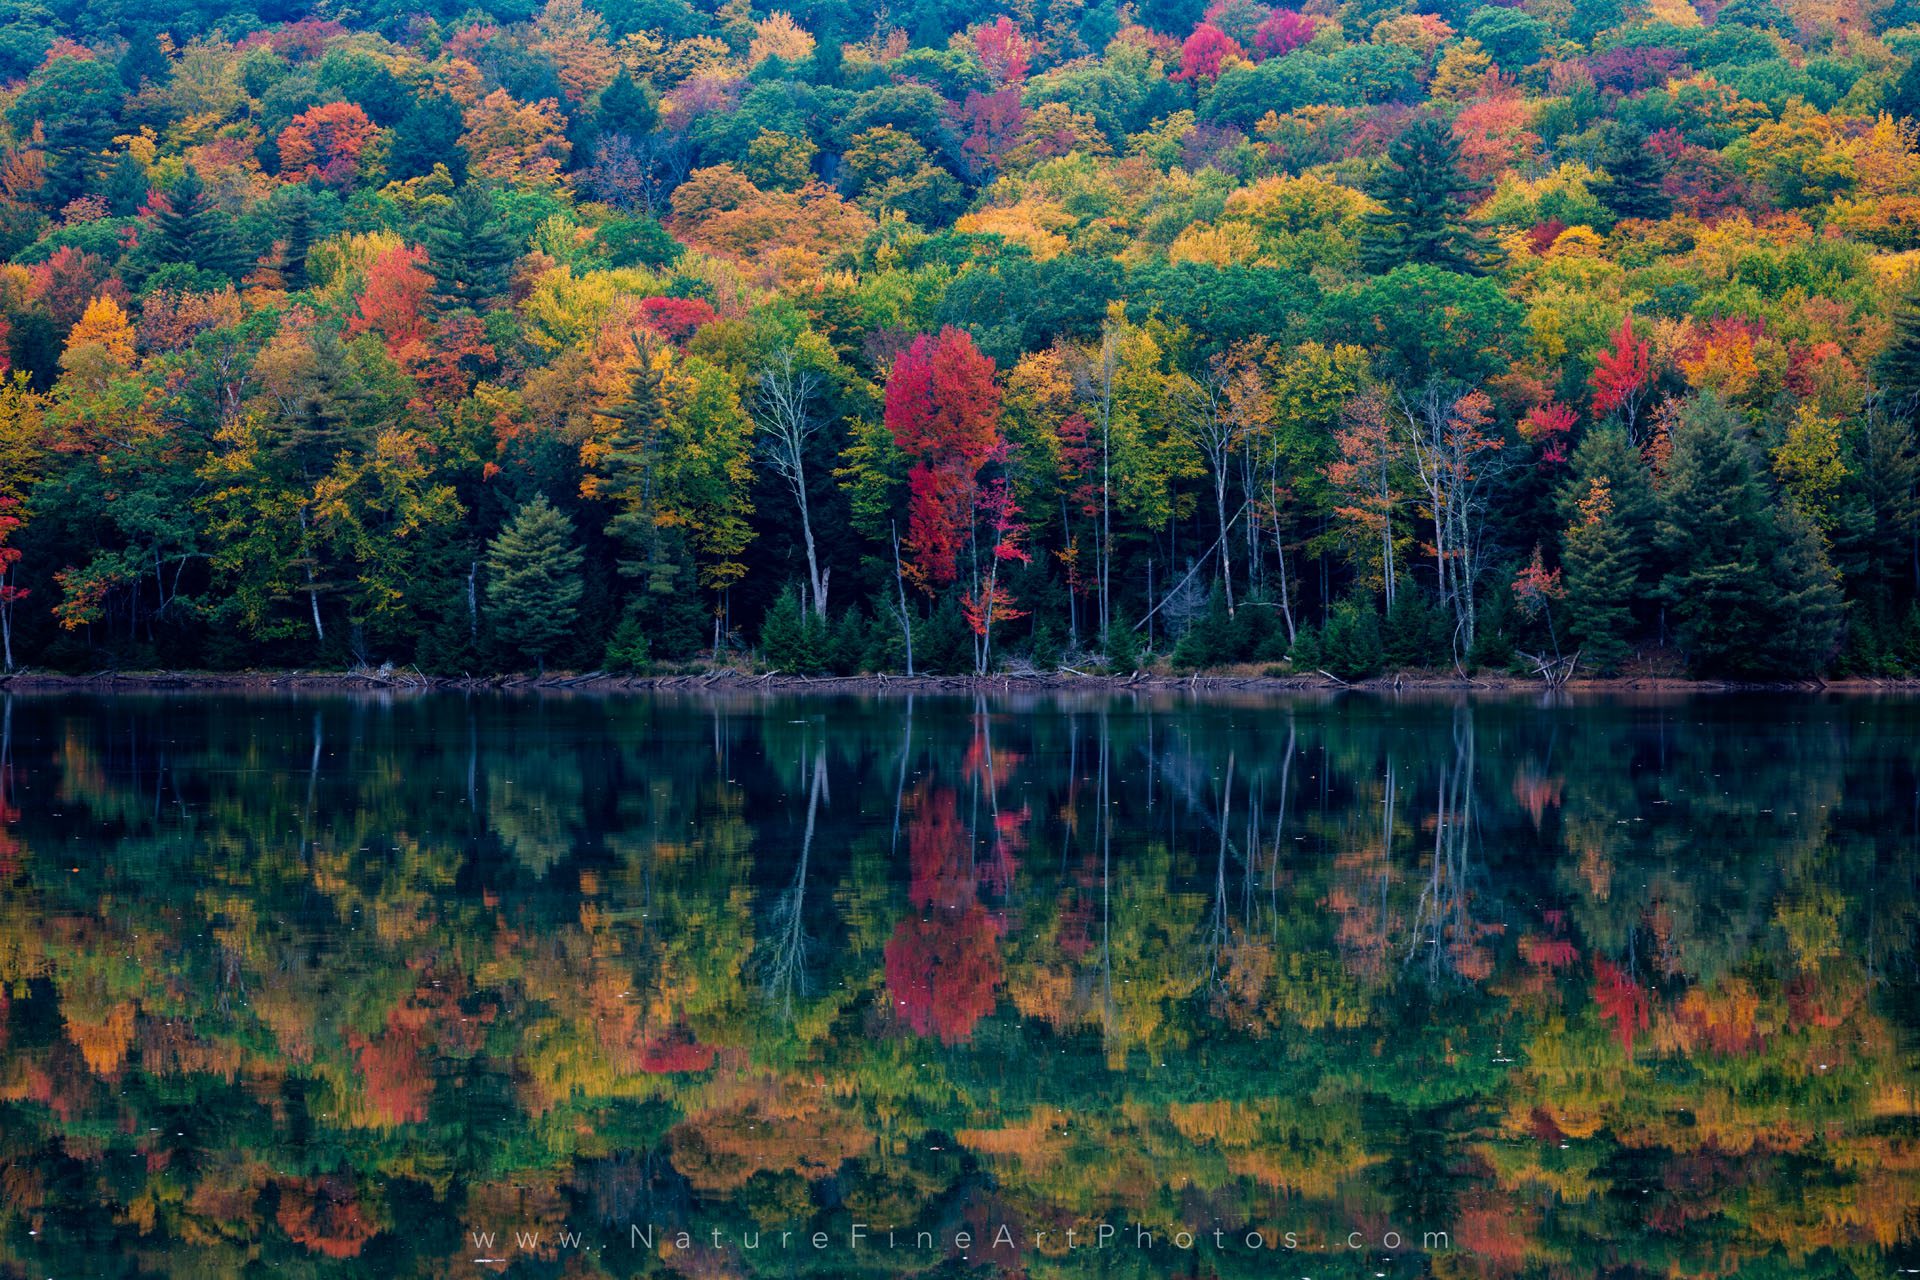 Fall colors in upstate ny by imaginee on DeviantArt